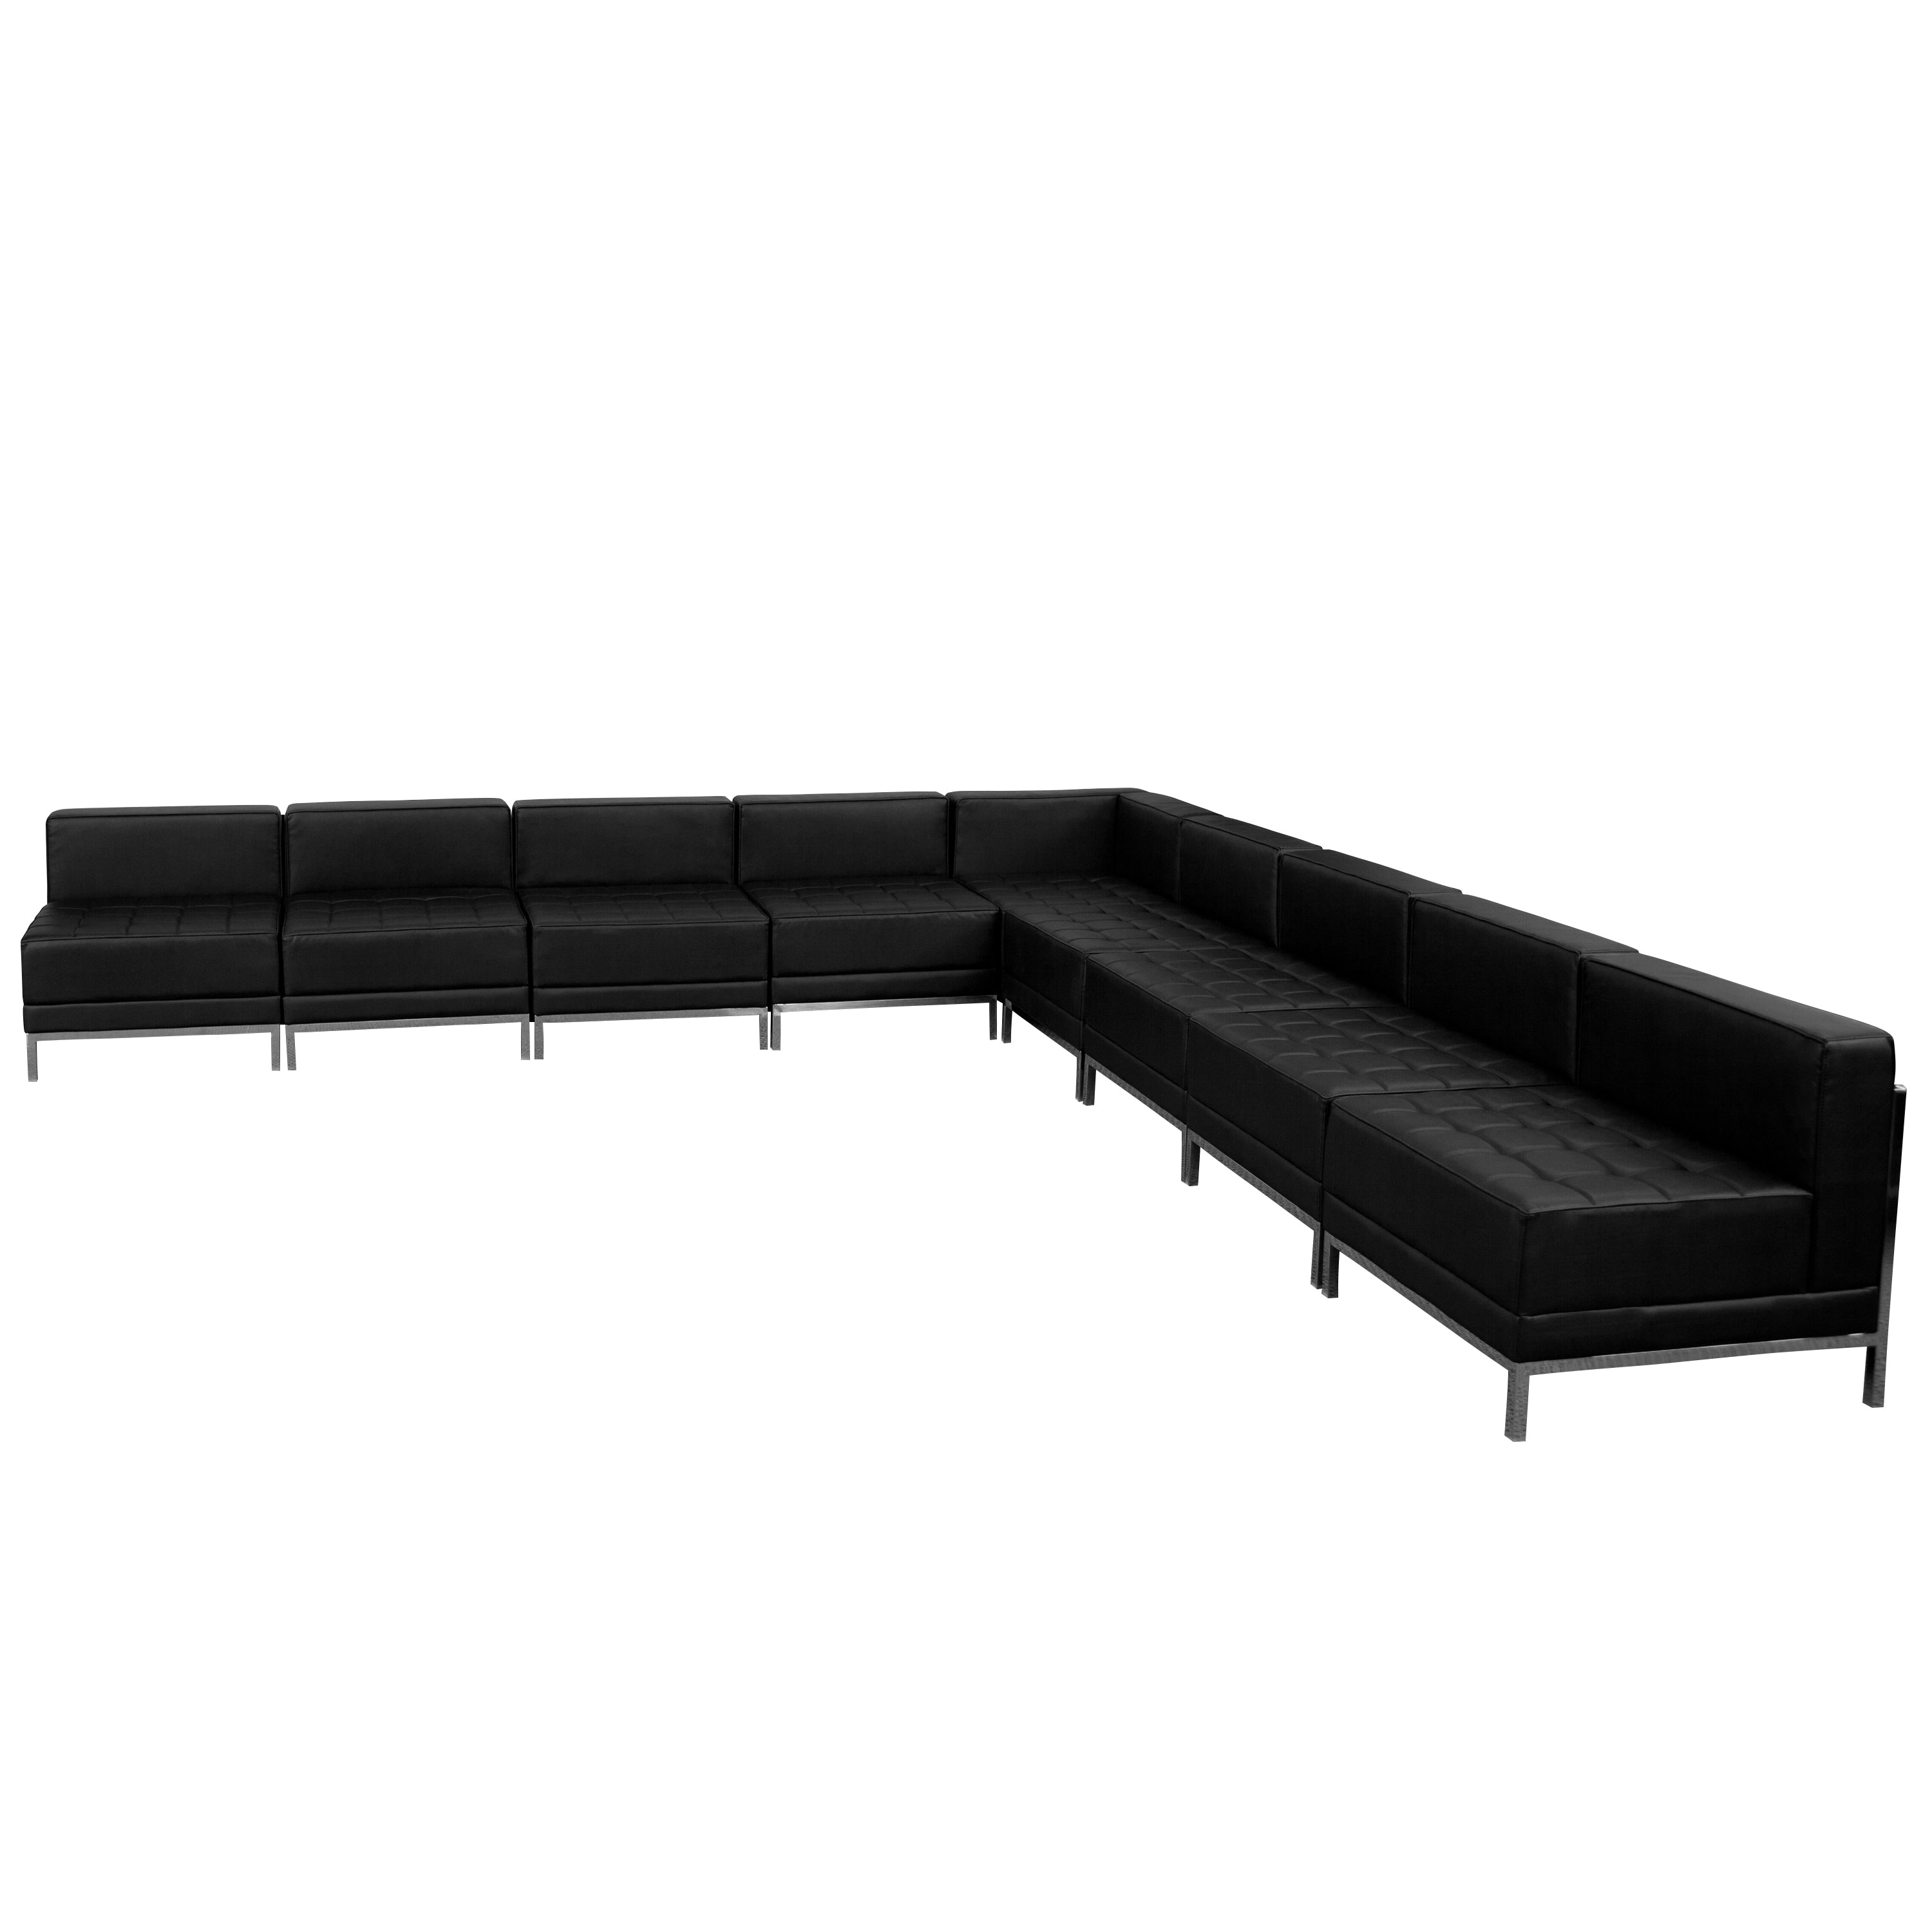 HERCULES Imagination Series LeatherSoft Sectional Configuration, 9 Pieces-Modular Reception Set-Flash Furniture-Wall2Wall Furnishings